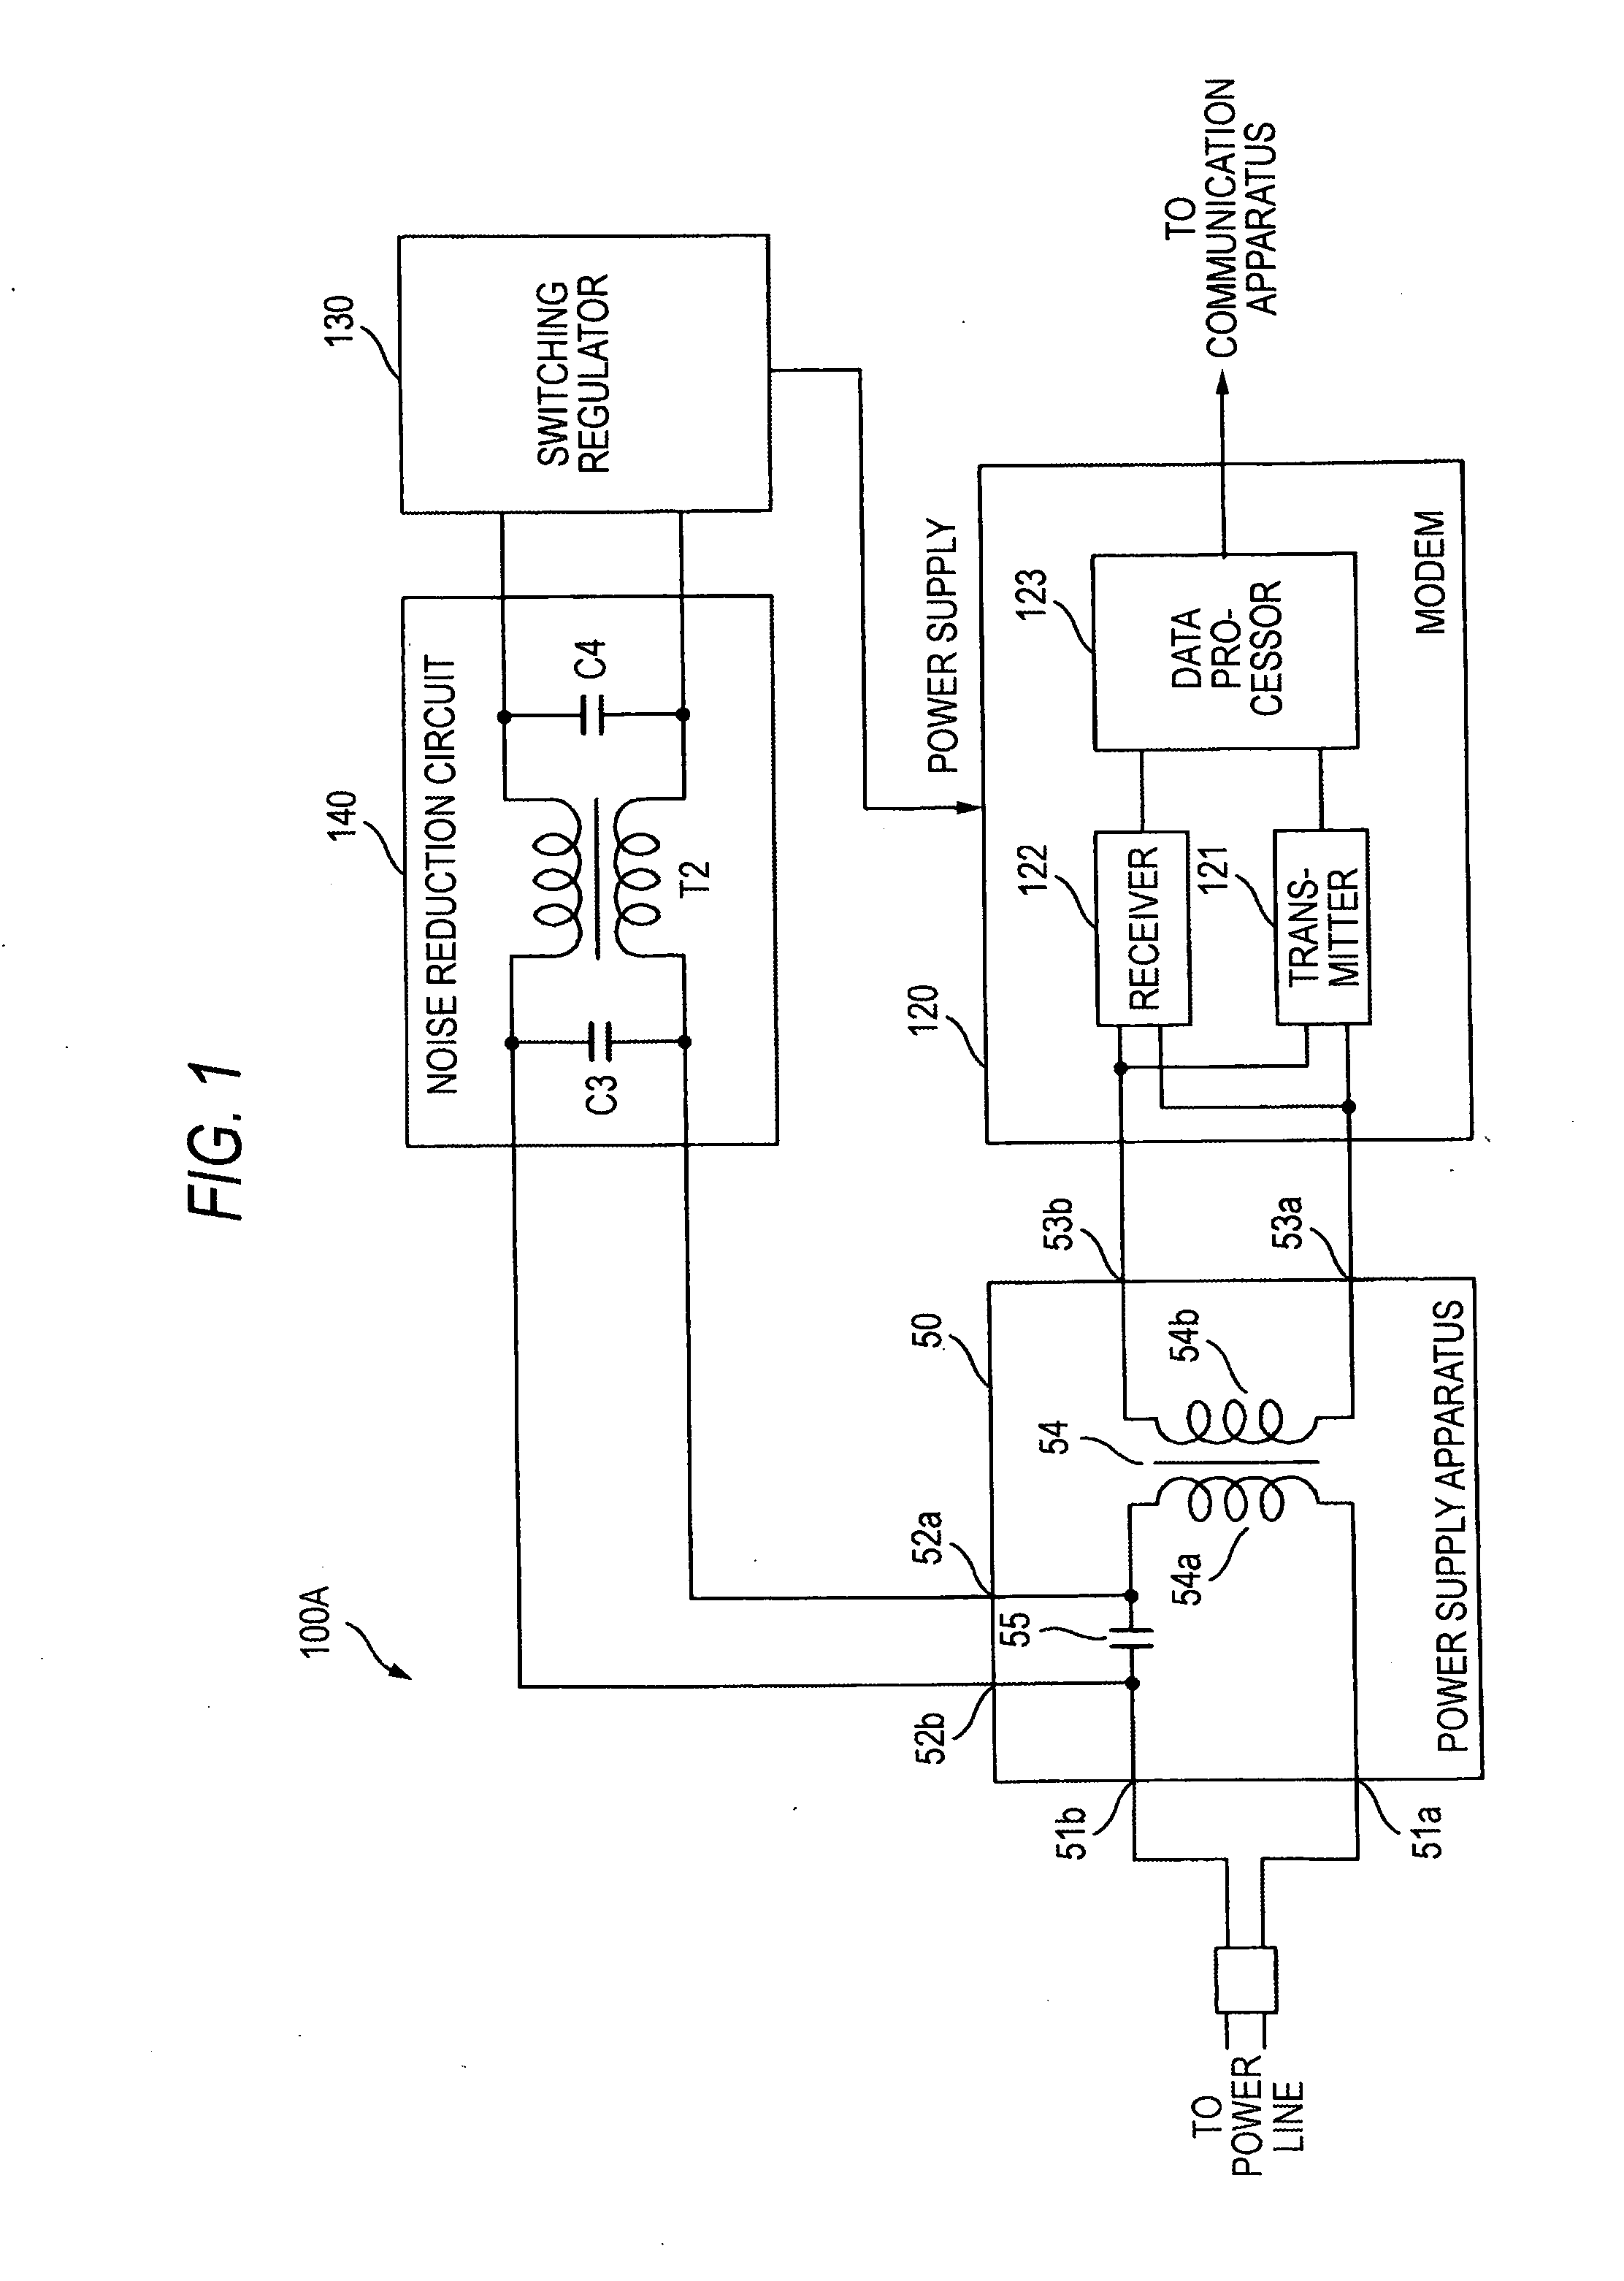 Power supply apparatus and power line communication apparatus